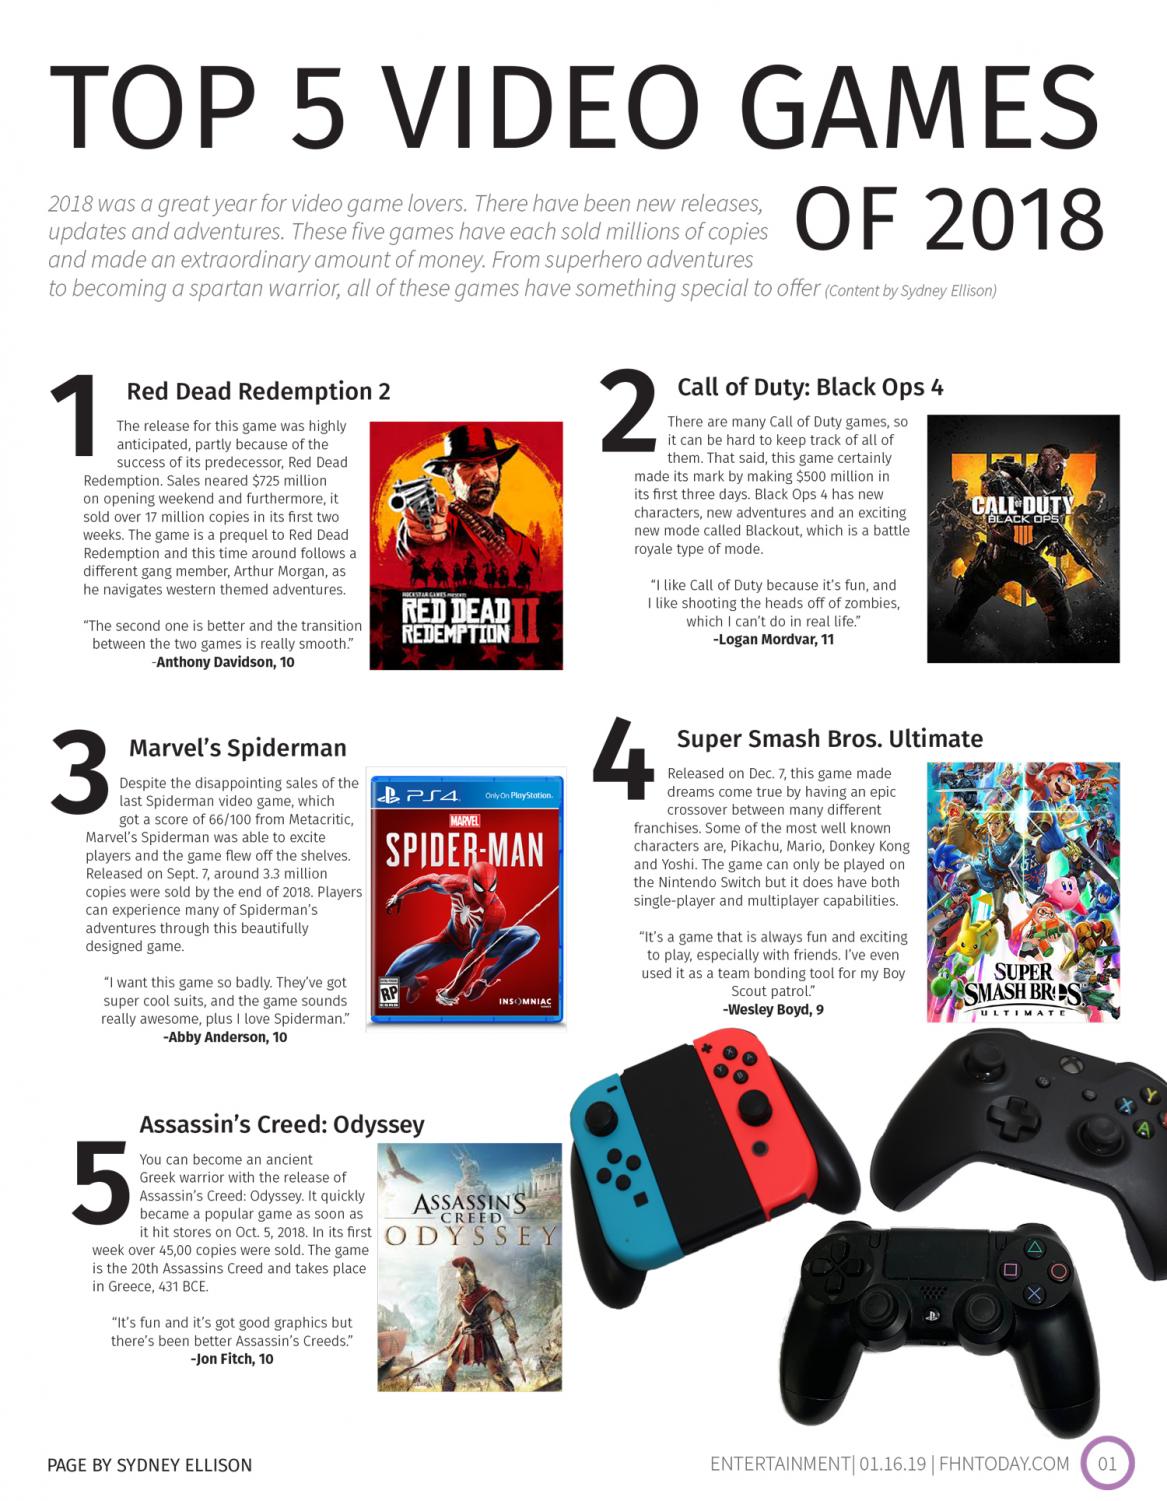 The Best Video Games Released in 2018